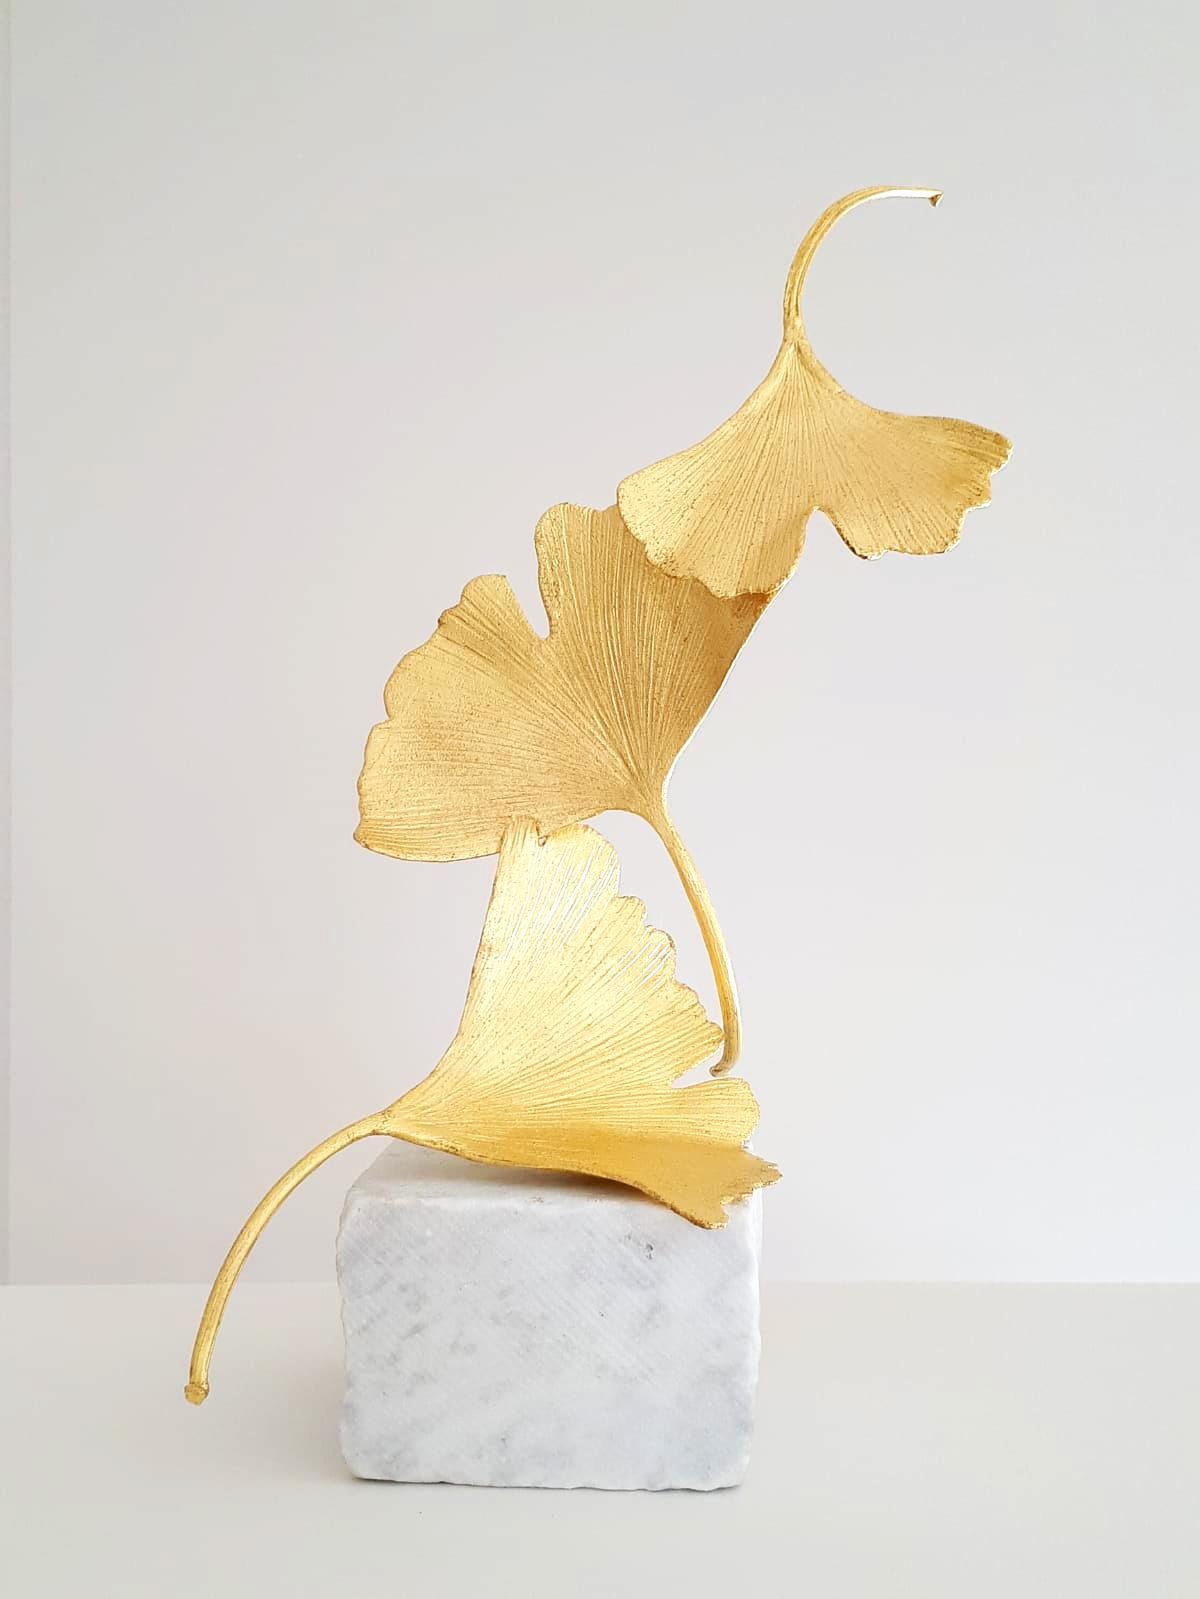 Golden Gingko by Kuno Vollet - Cast Brass gilded sculpture on white marble base 3